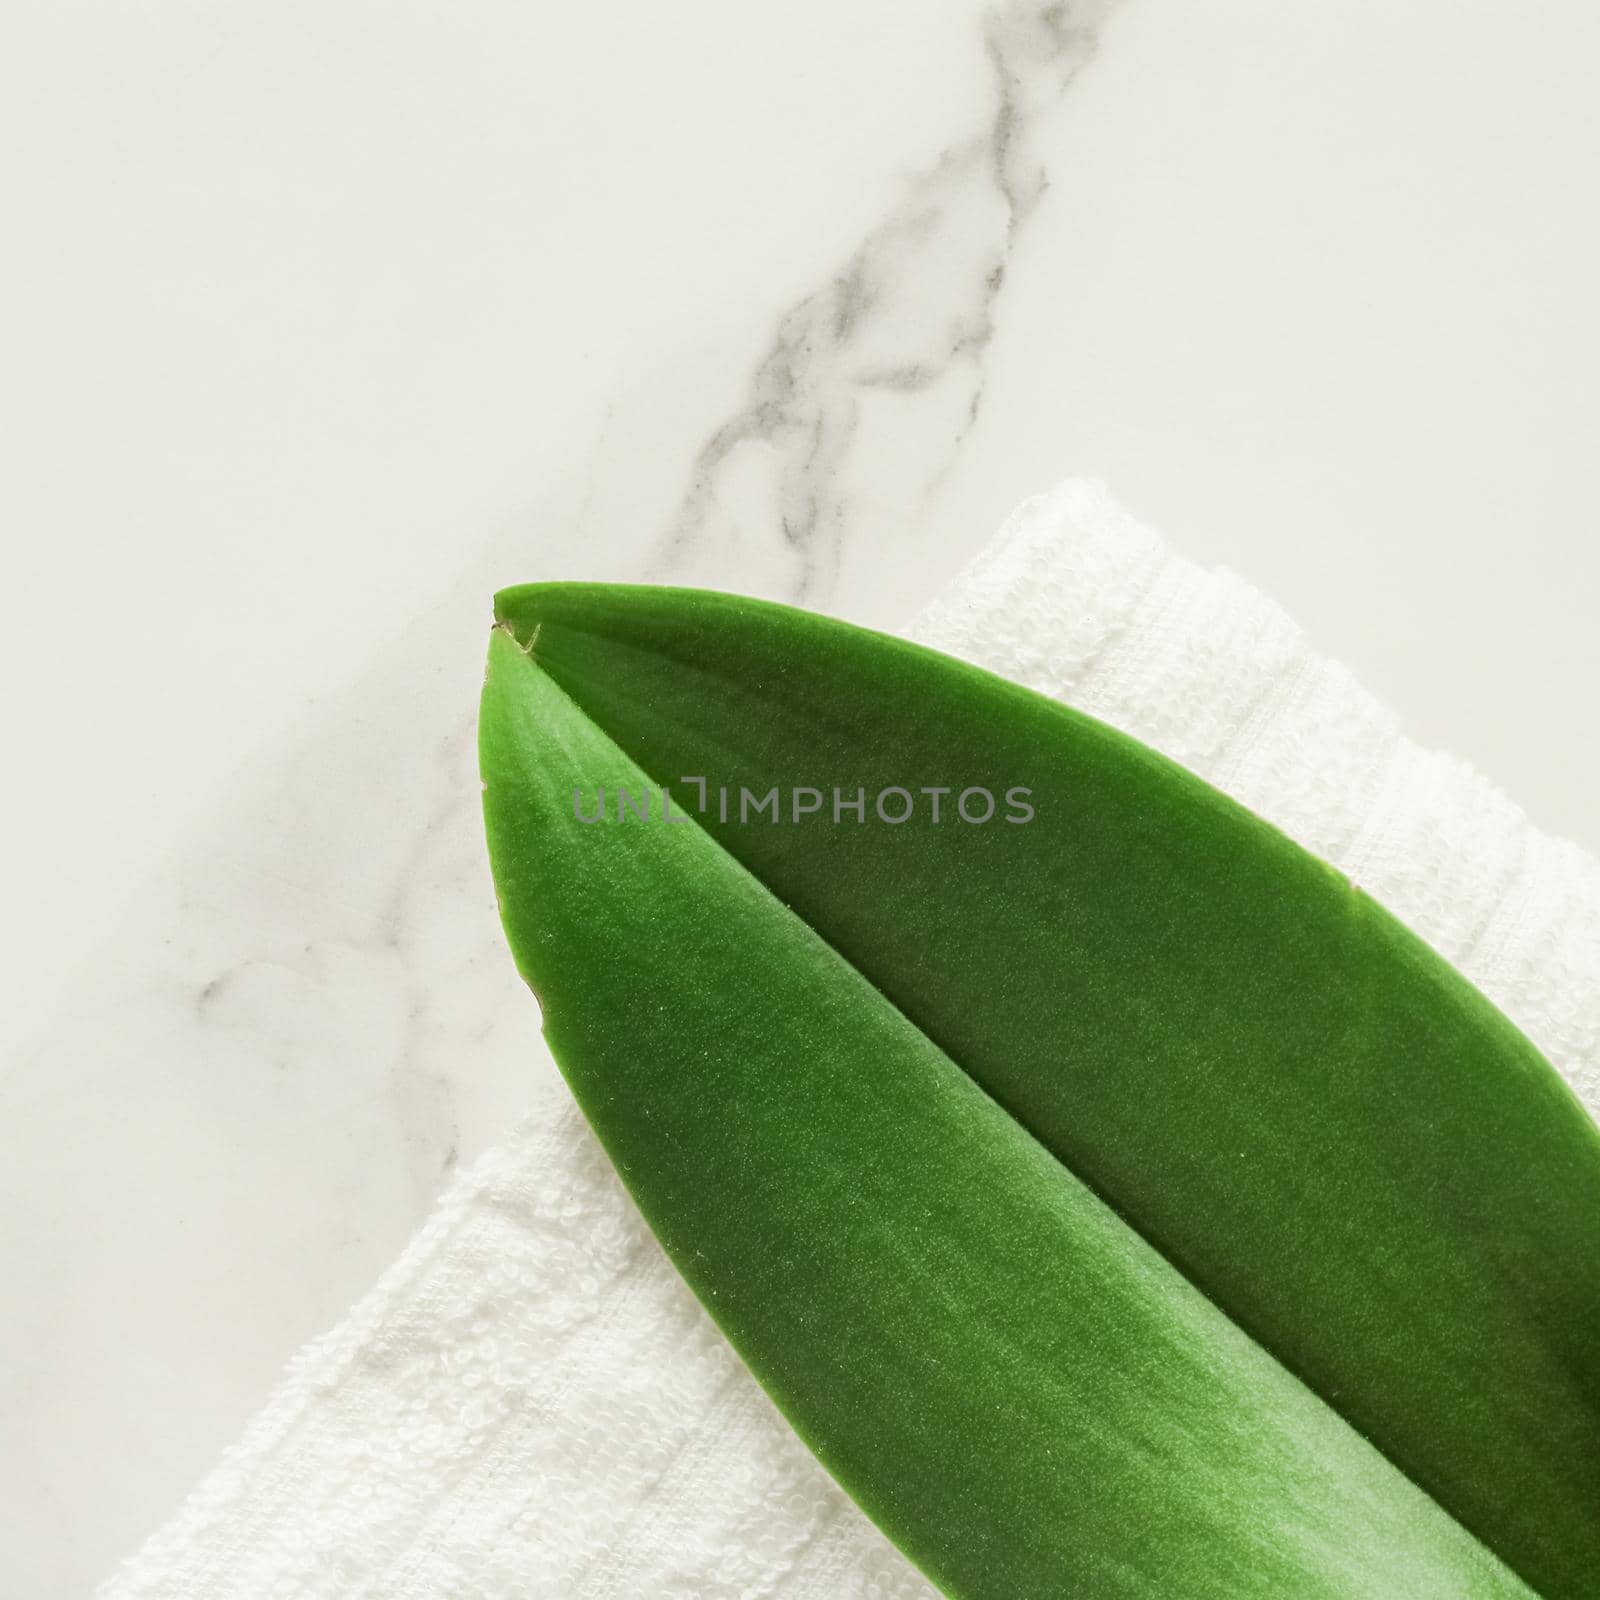 Green leaf on marble, flatlay - luxury design background, sustainable products and environmental concept. Eco-friendly way of life